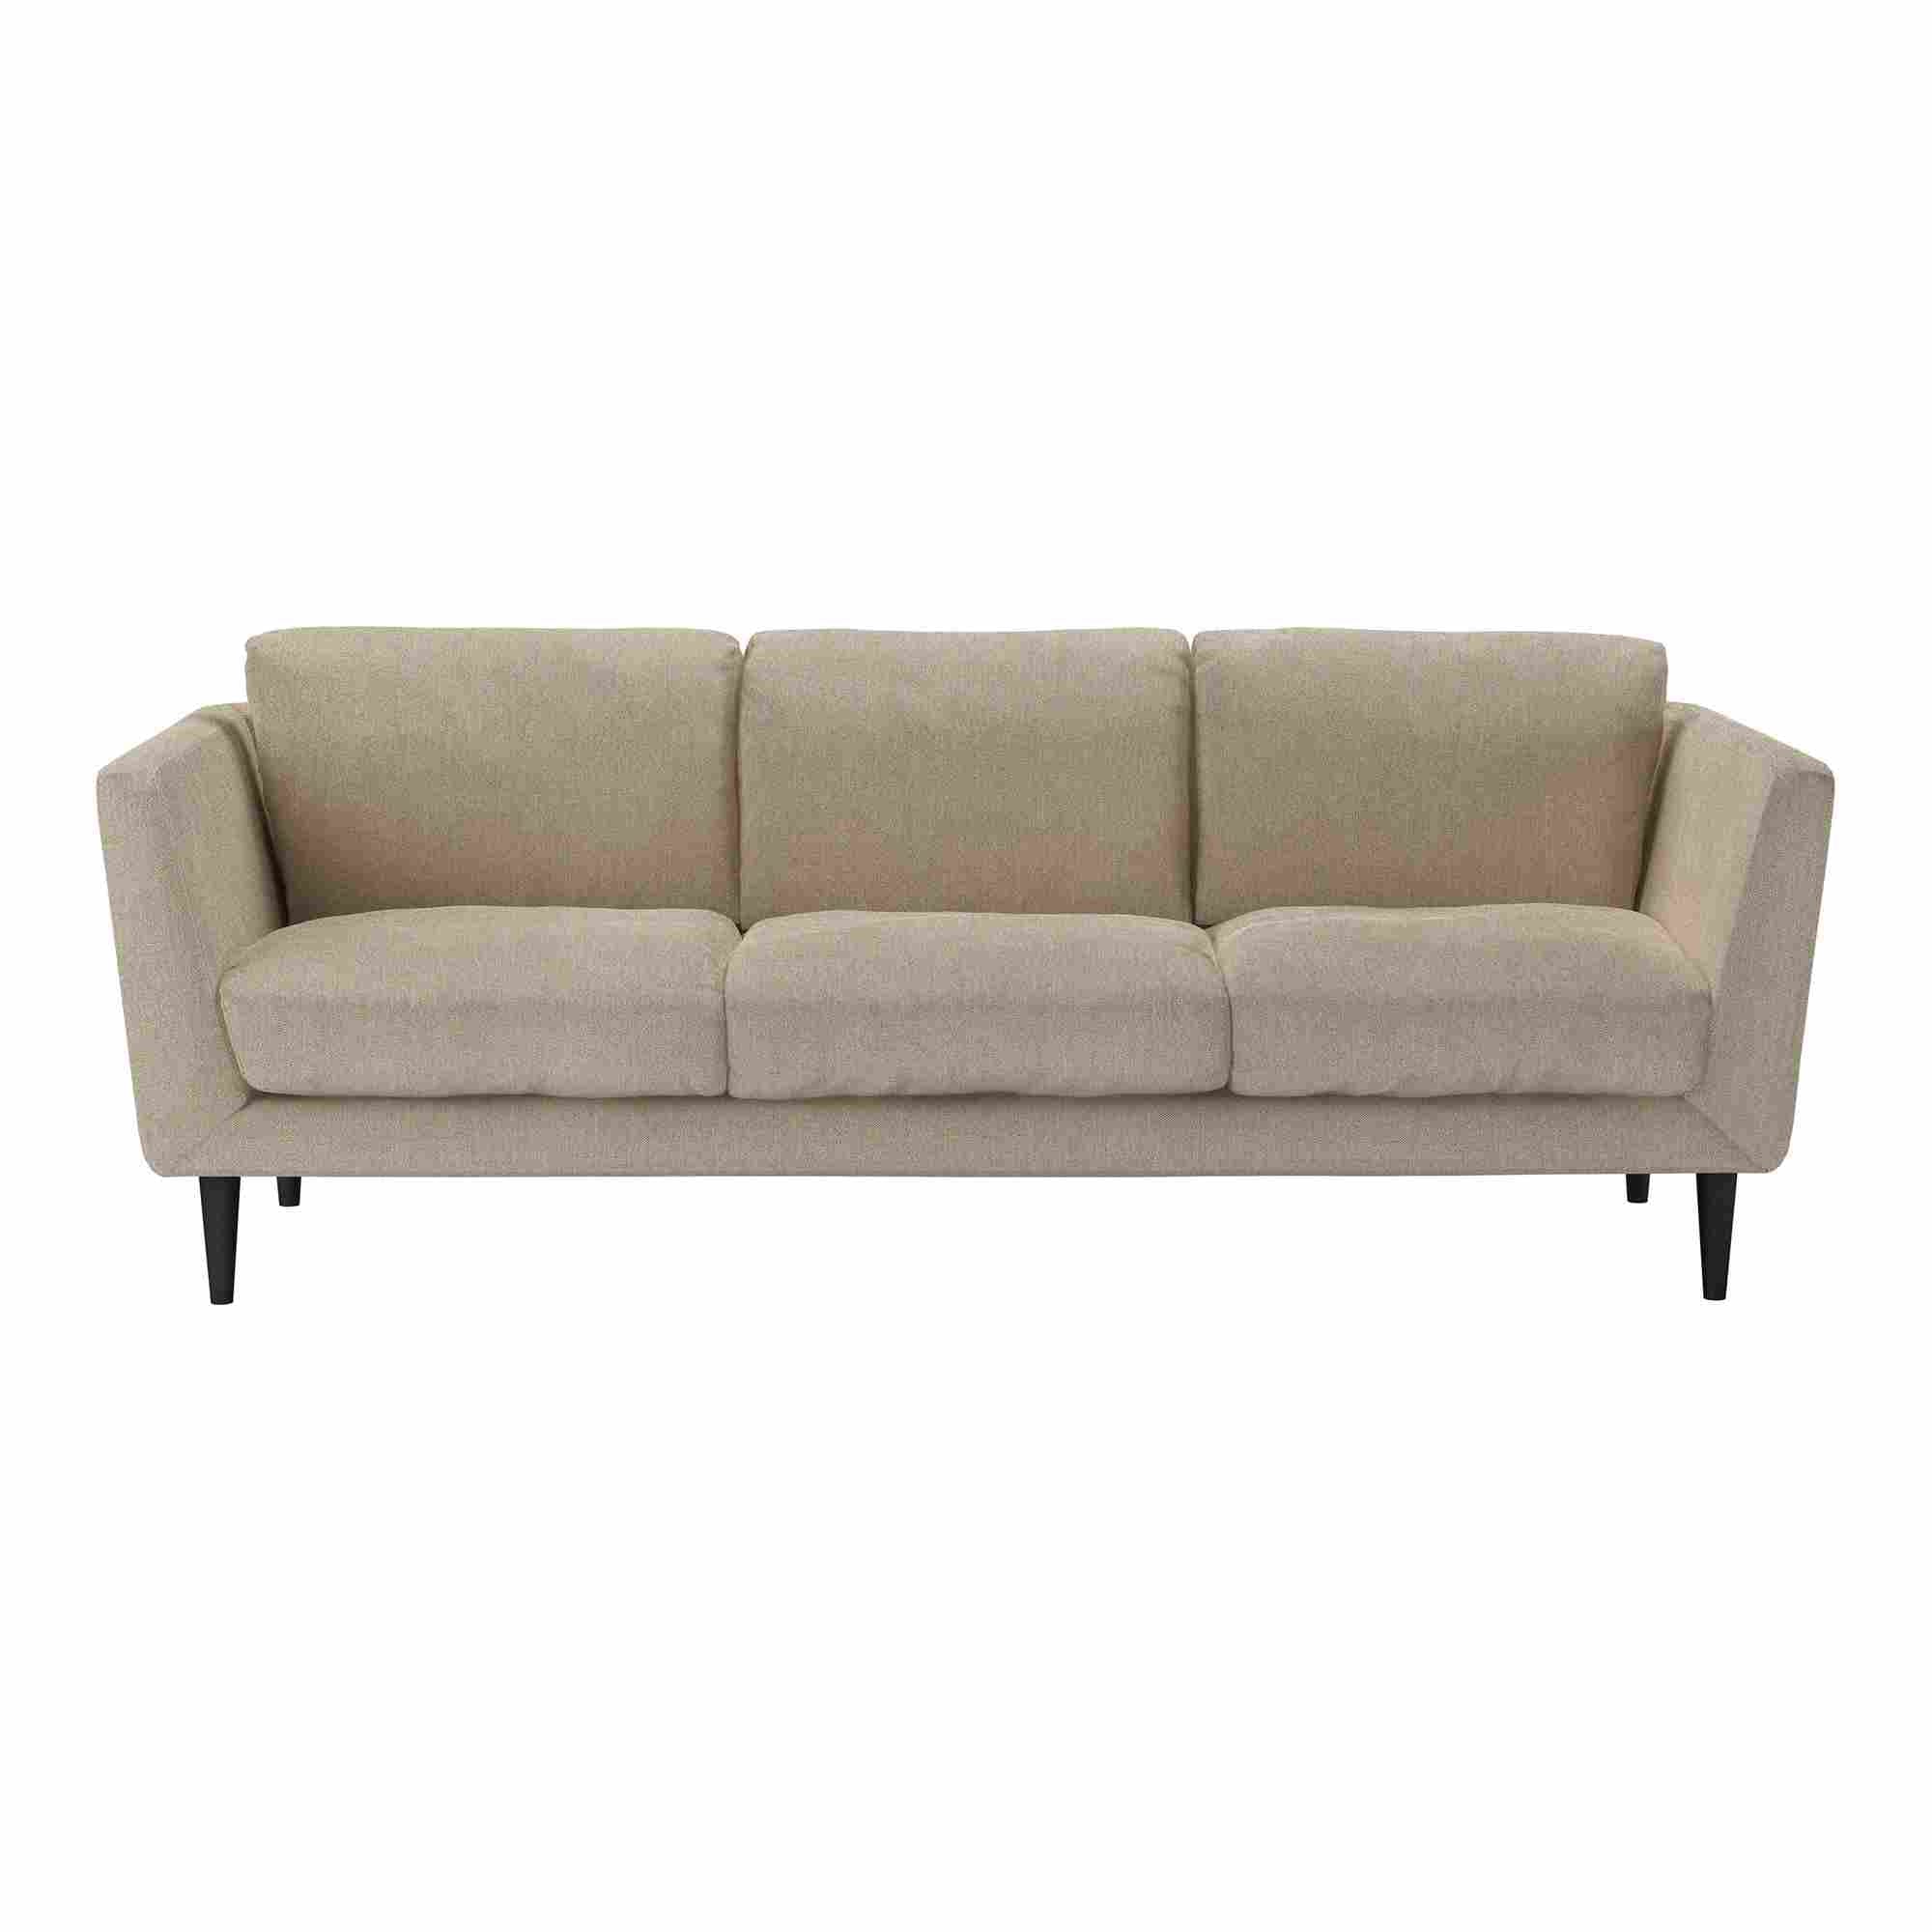 Holly Cashew Baylee Viscose Linen Sofa - 3 Seater